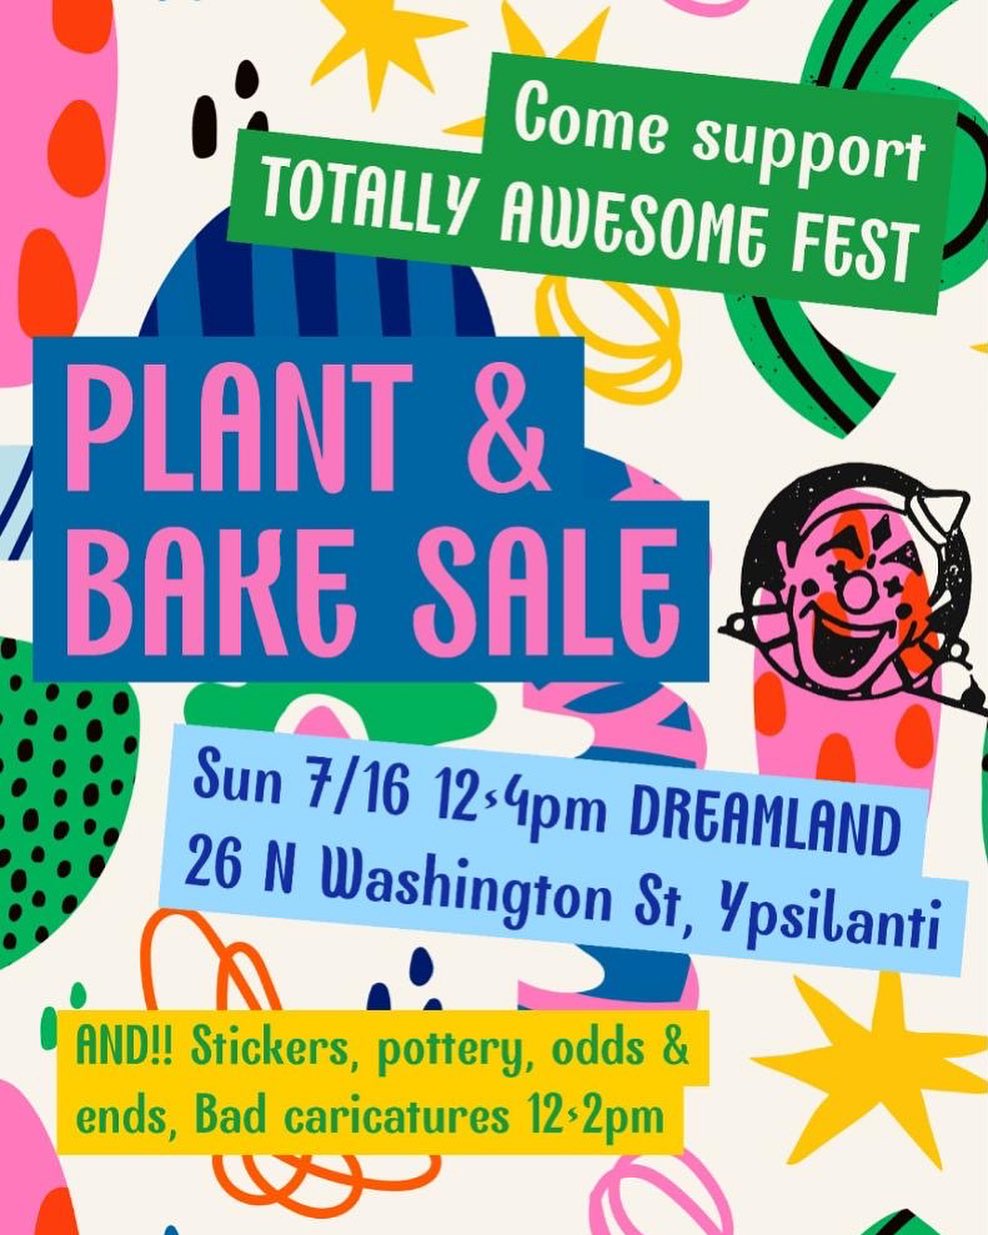 Totally Awesome Fest Plant & Bake Sale in Ypsi!